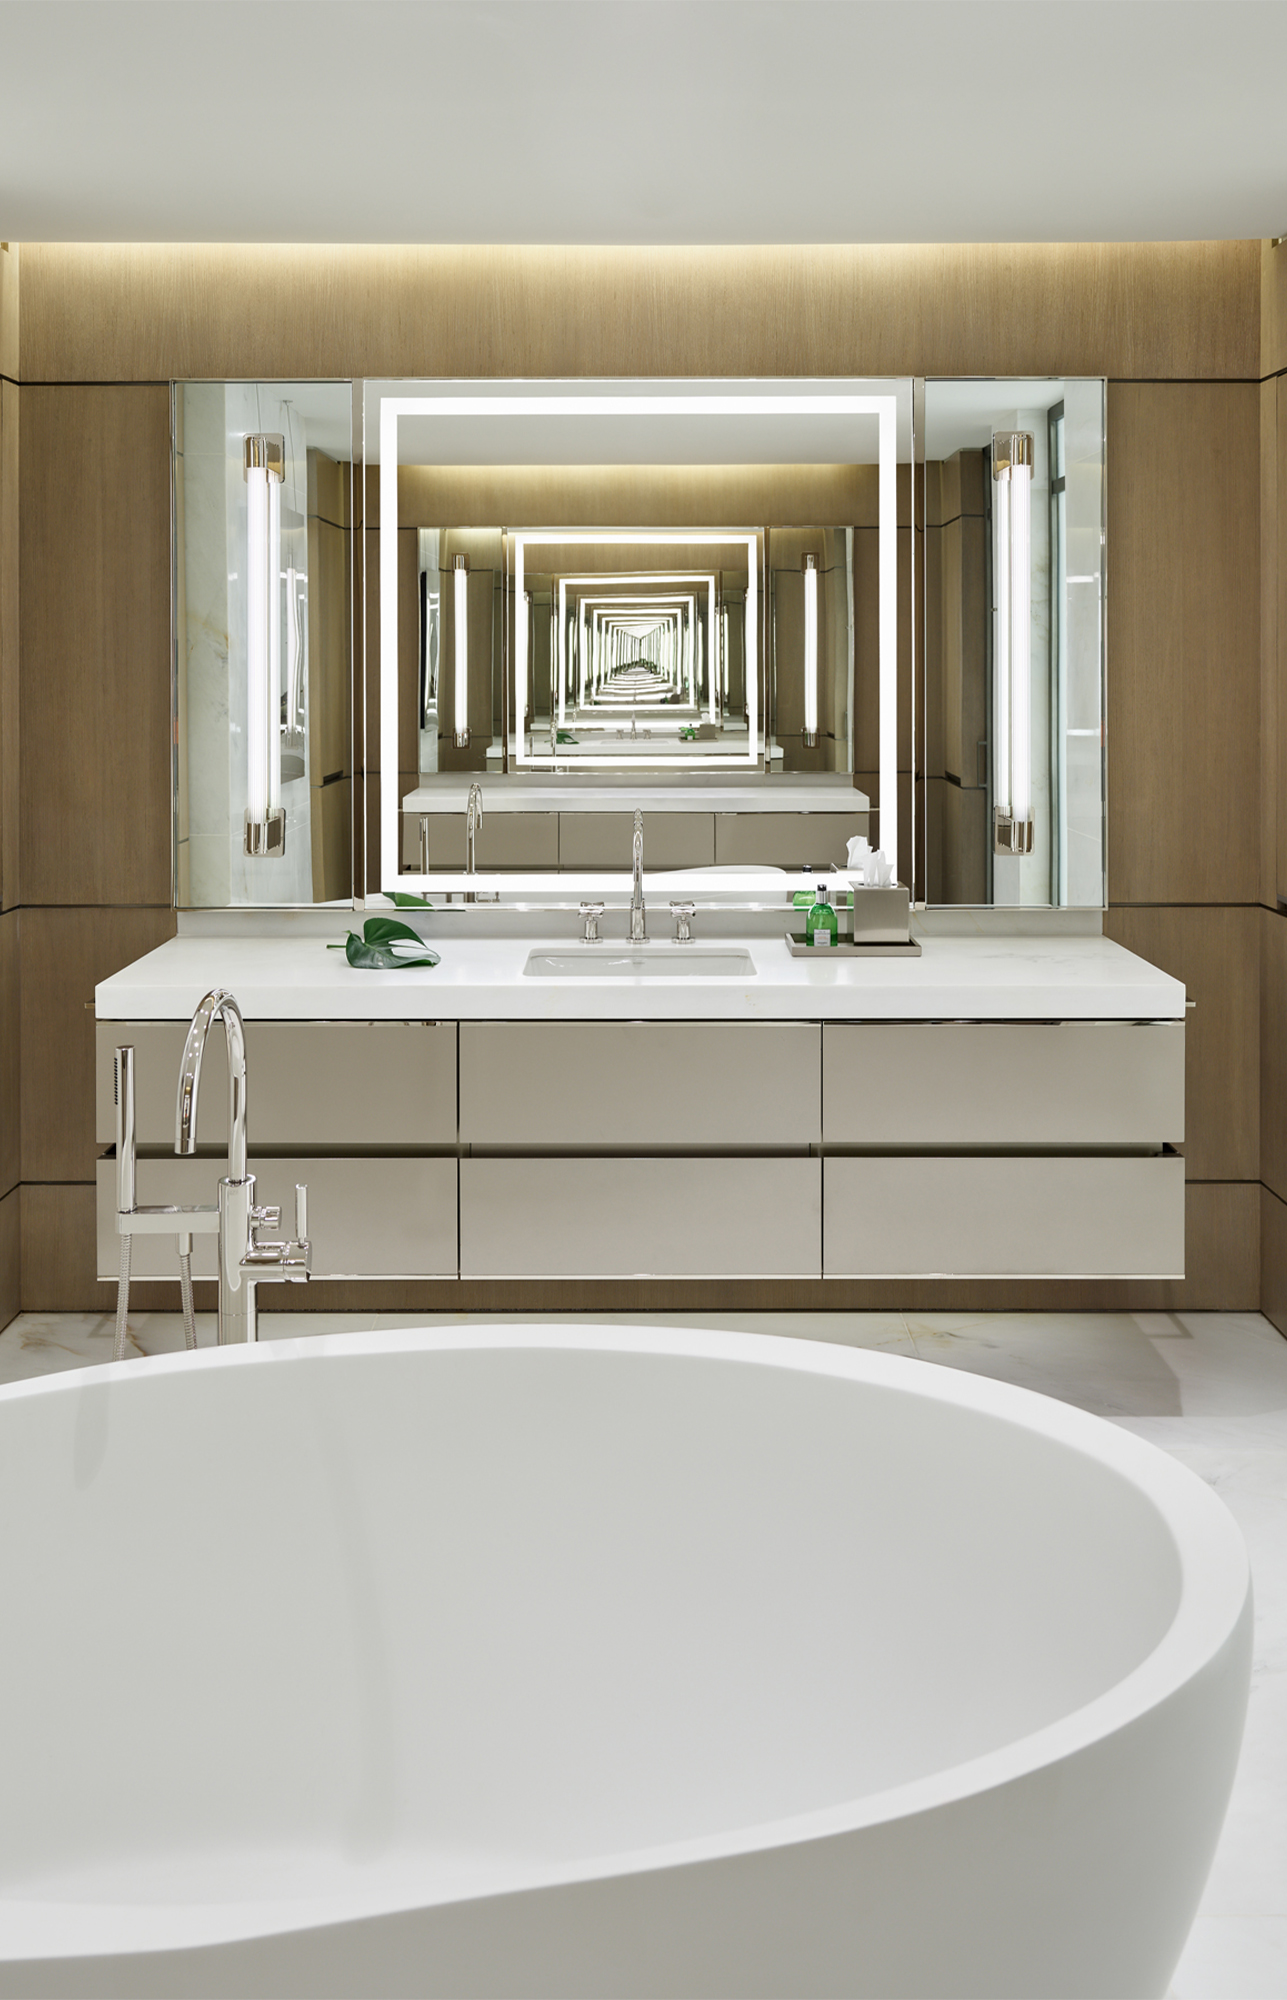 House-of-Hunt-Interior-Design-Chicago-Modern-Bathroom-With-Soaking-Tub-Mobile